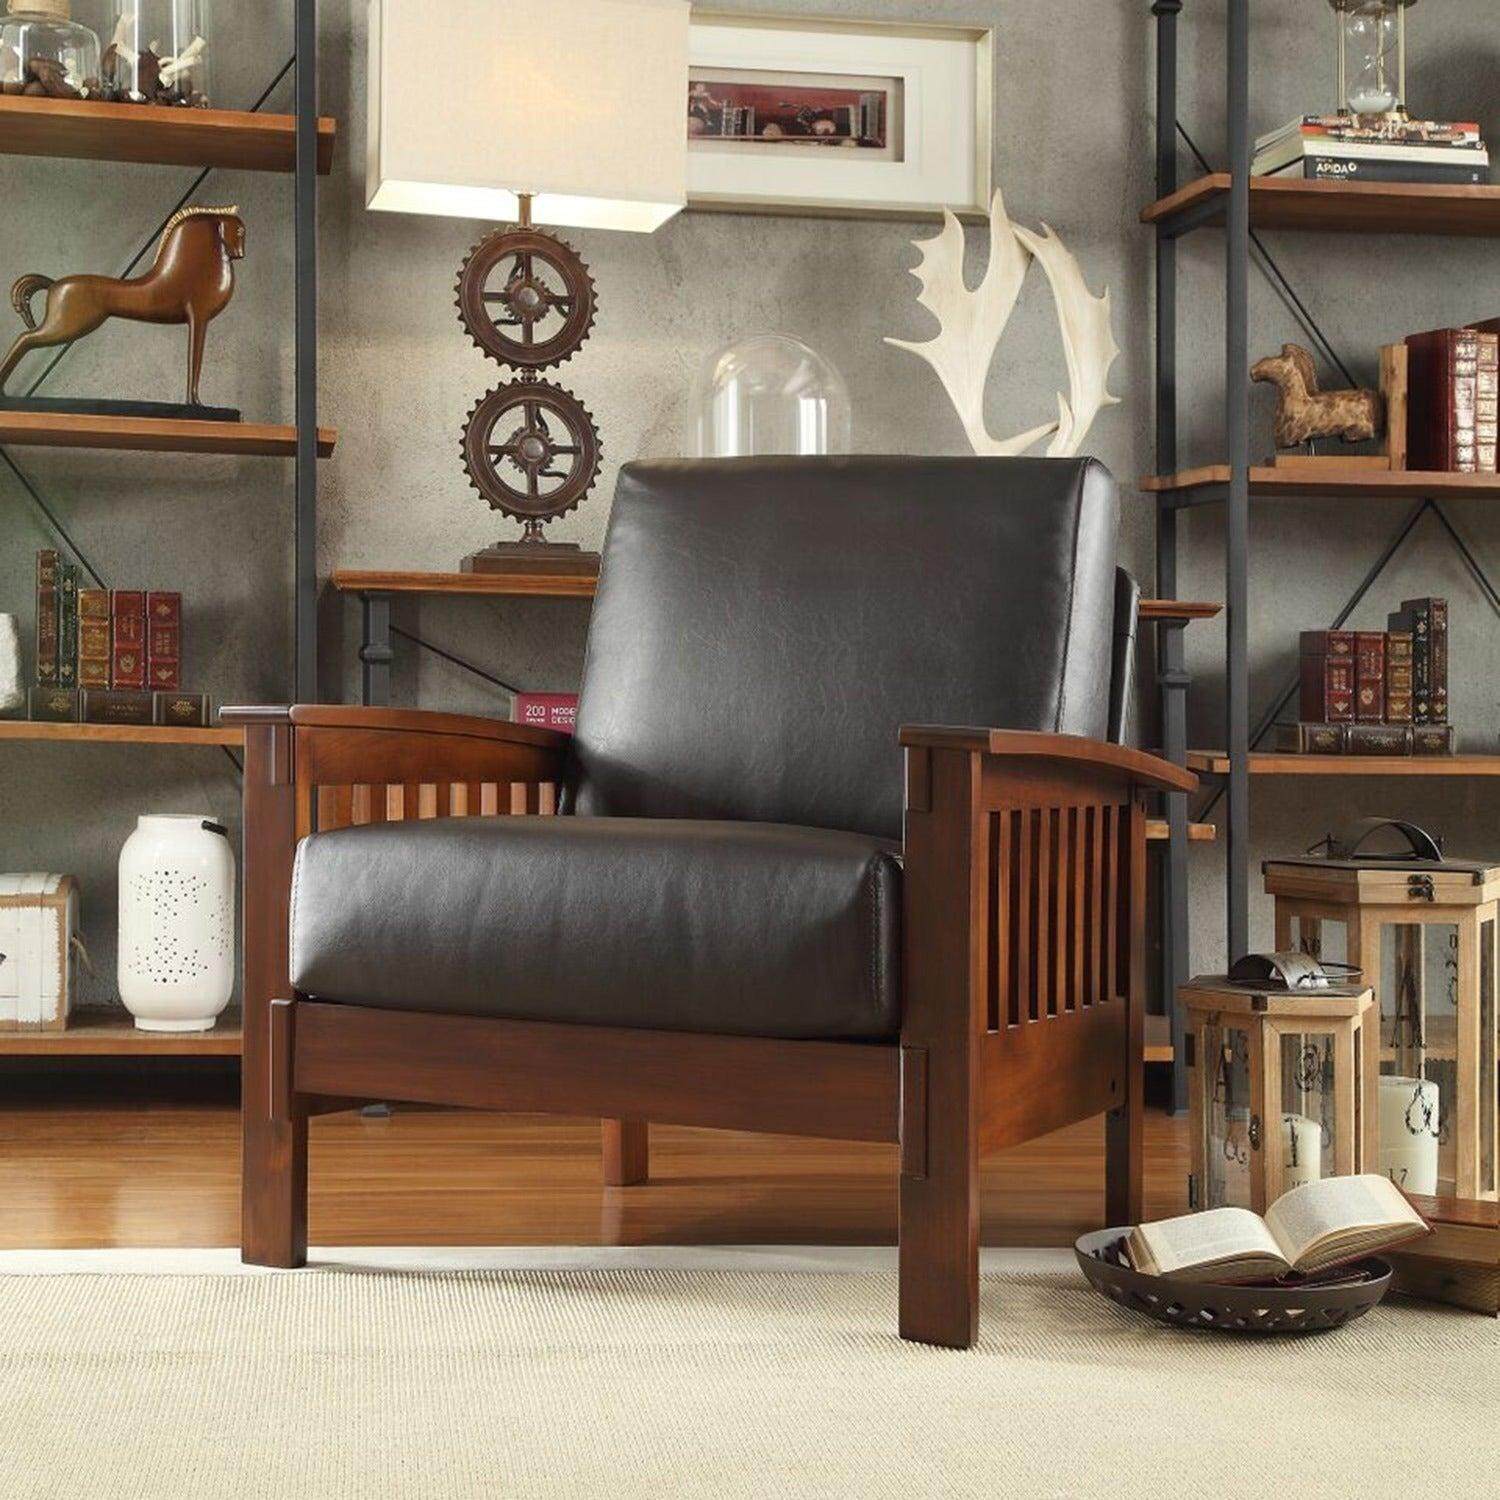 Oak style mission arm chair by tables and trolleys 3bd.jpg